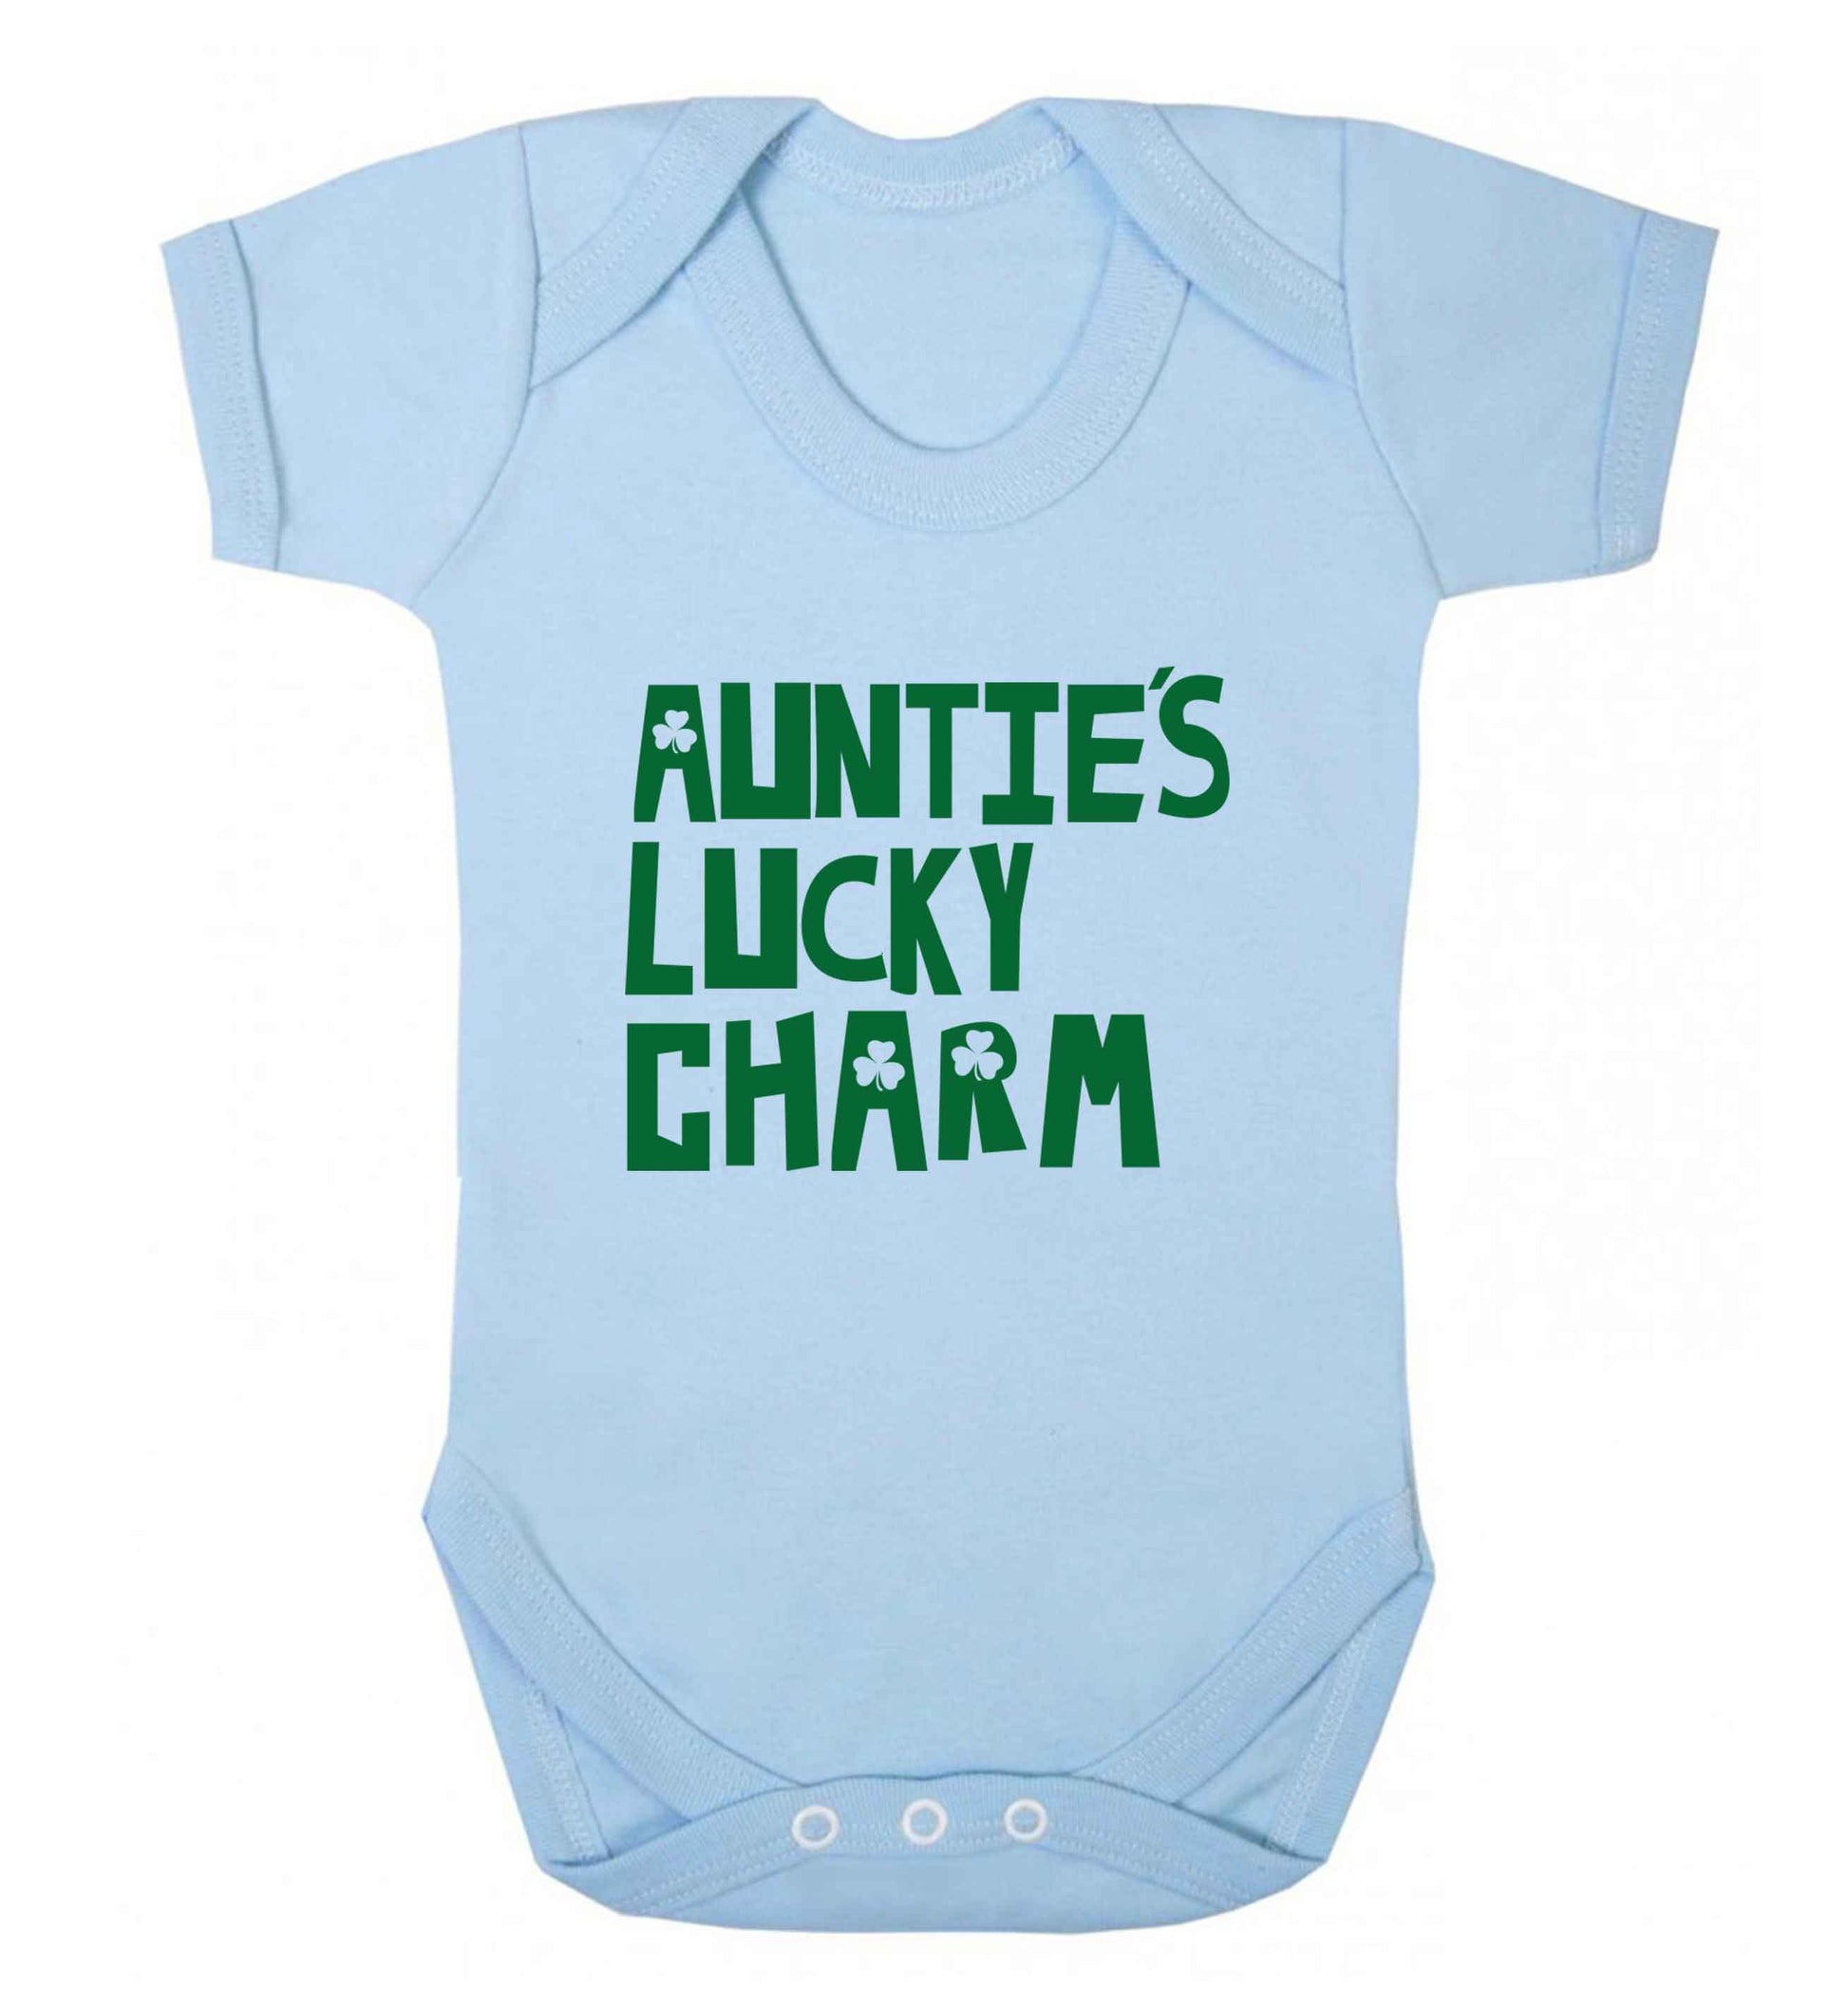 Auntie's lucky charm baby vest pale blue 18-24 months